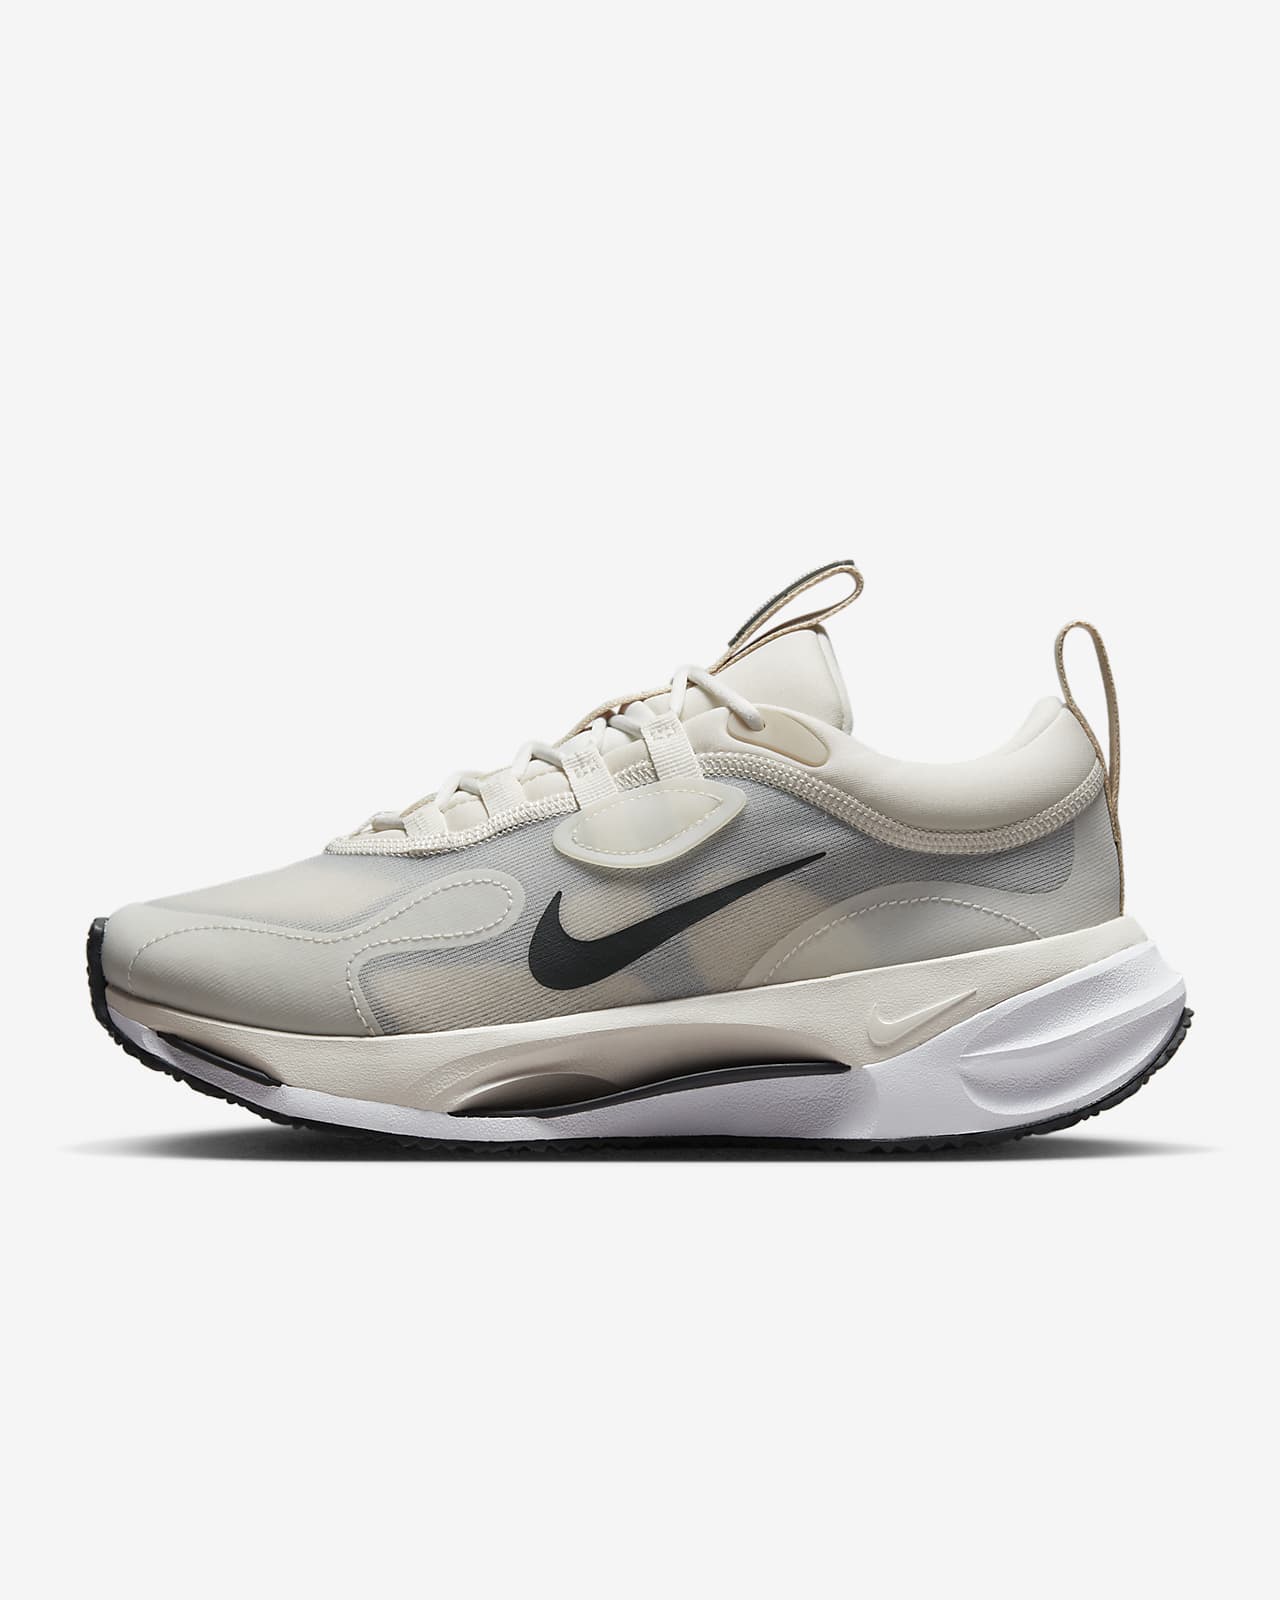 Best Nike shoes for gym workouts-saigonsouth.com.vn